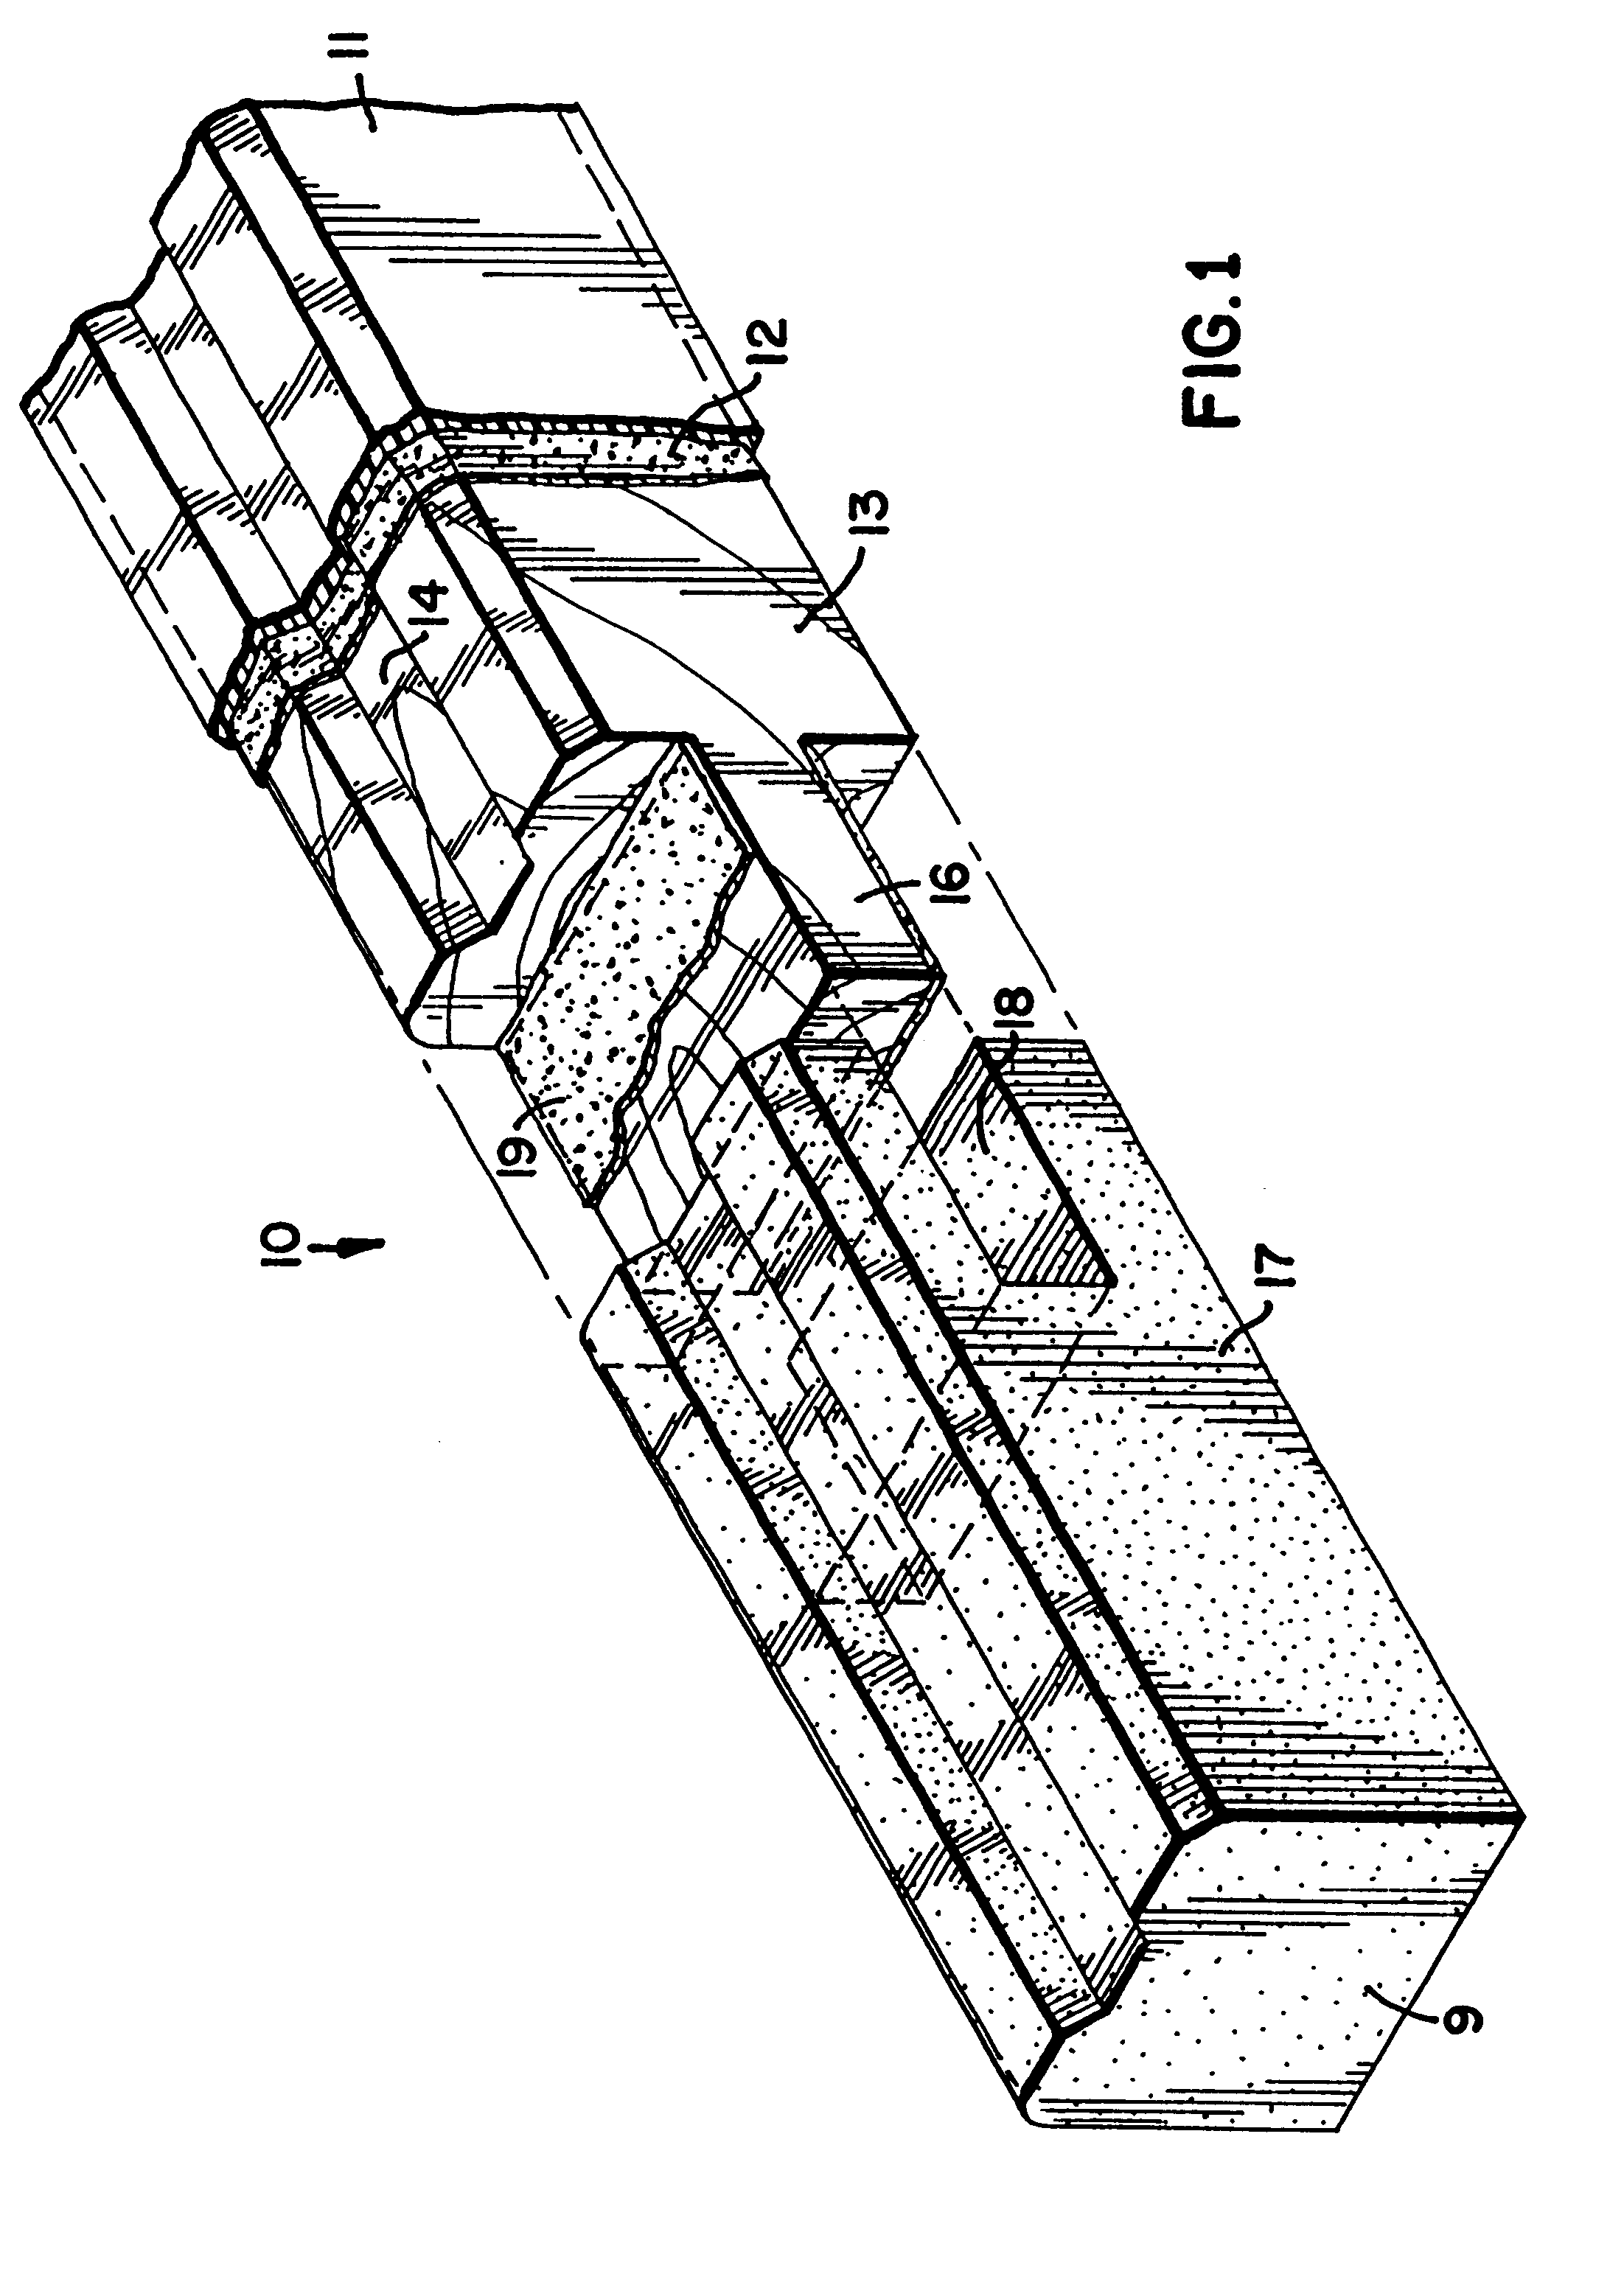 Polymer covered advanced polymer/wood composite structural member